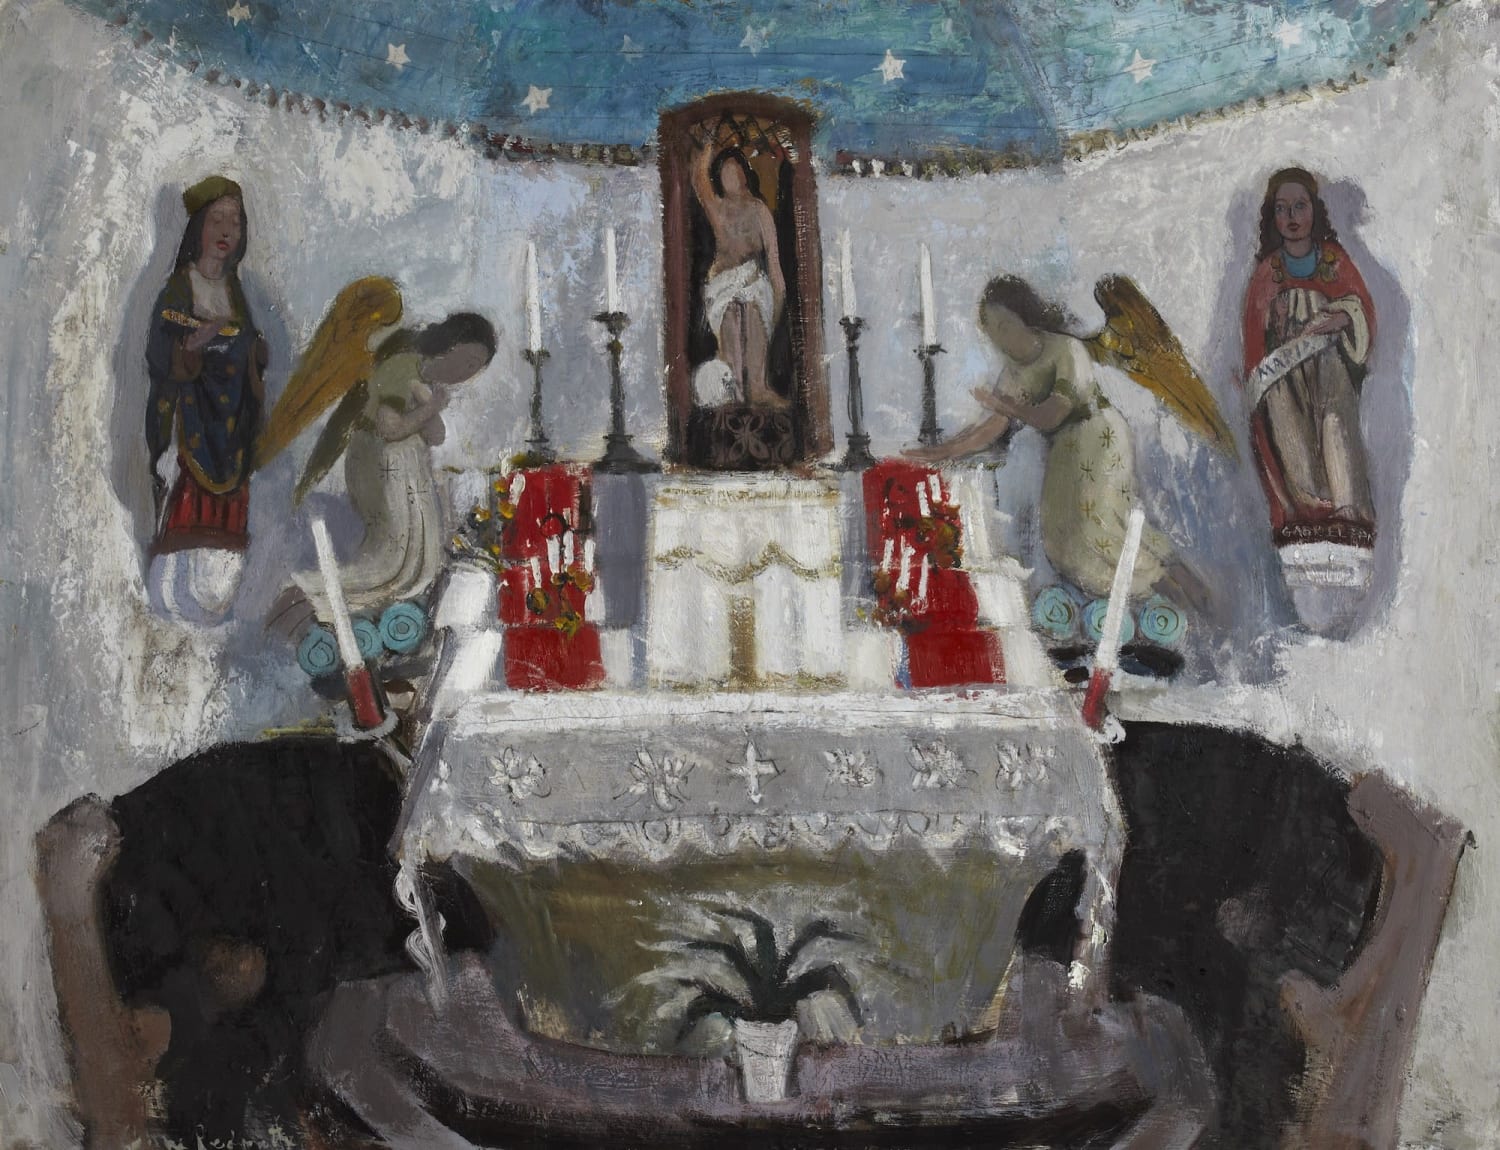 Anne Redpath RSA RSW (1895-1965) In the Church of St Jean, Tréboul  oil on board, around 1953-54 86.3 x 111.6cm  RSA Diploma Collection (Deposited 1956) 1995.03